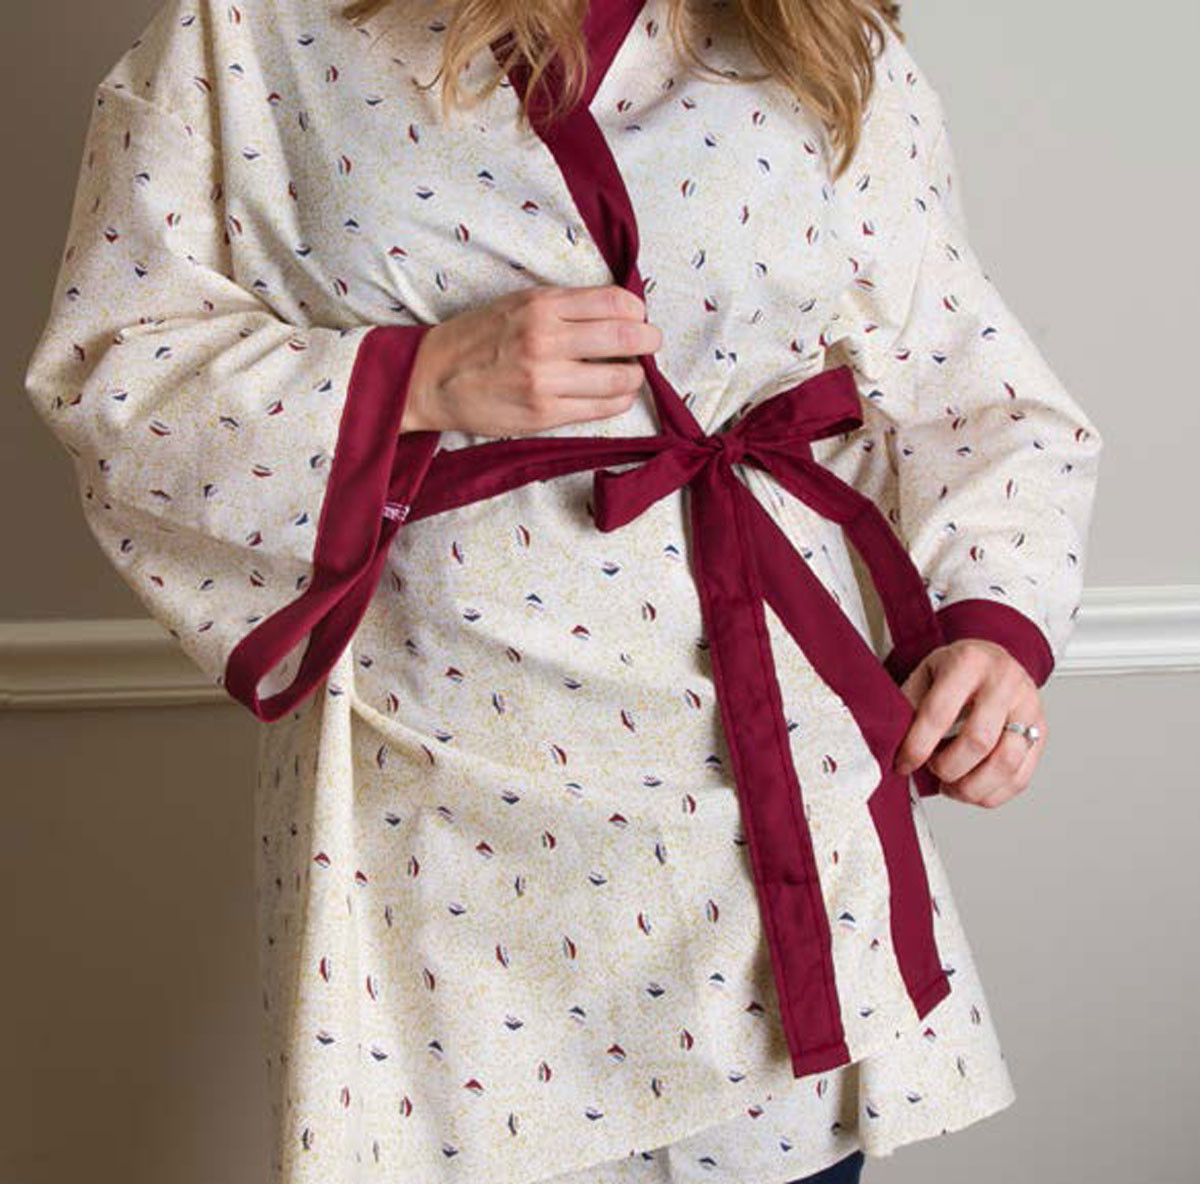 For which settings are Sponge Print mammography gowns like Mammography Capes and Robes perfect?